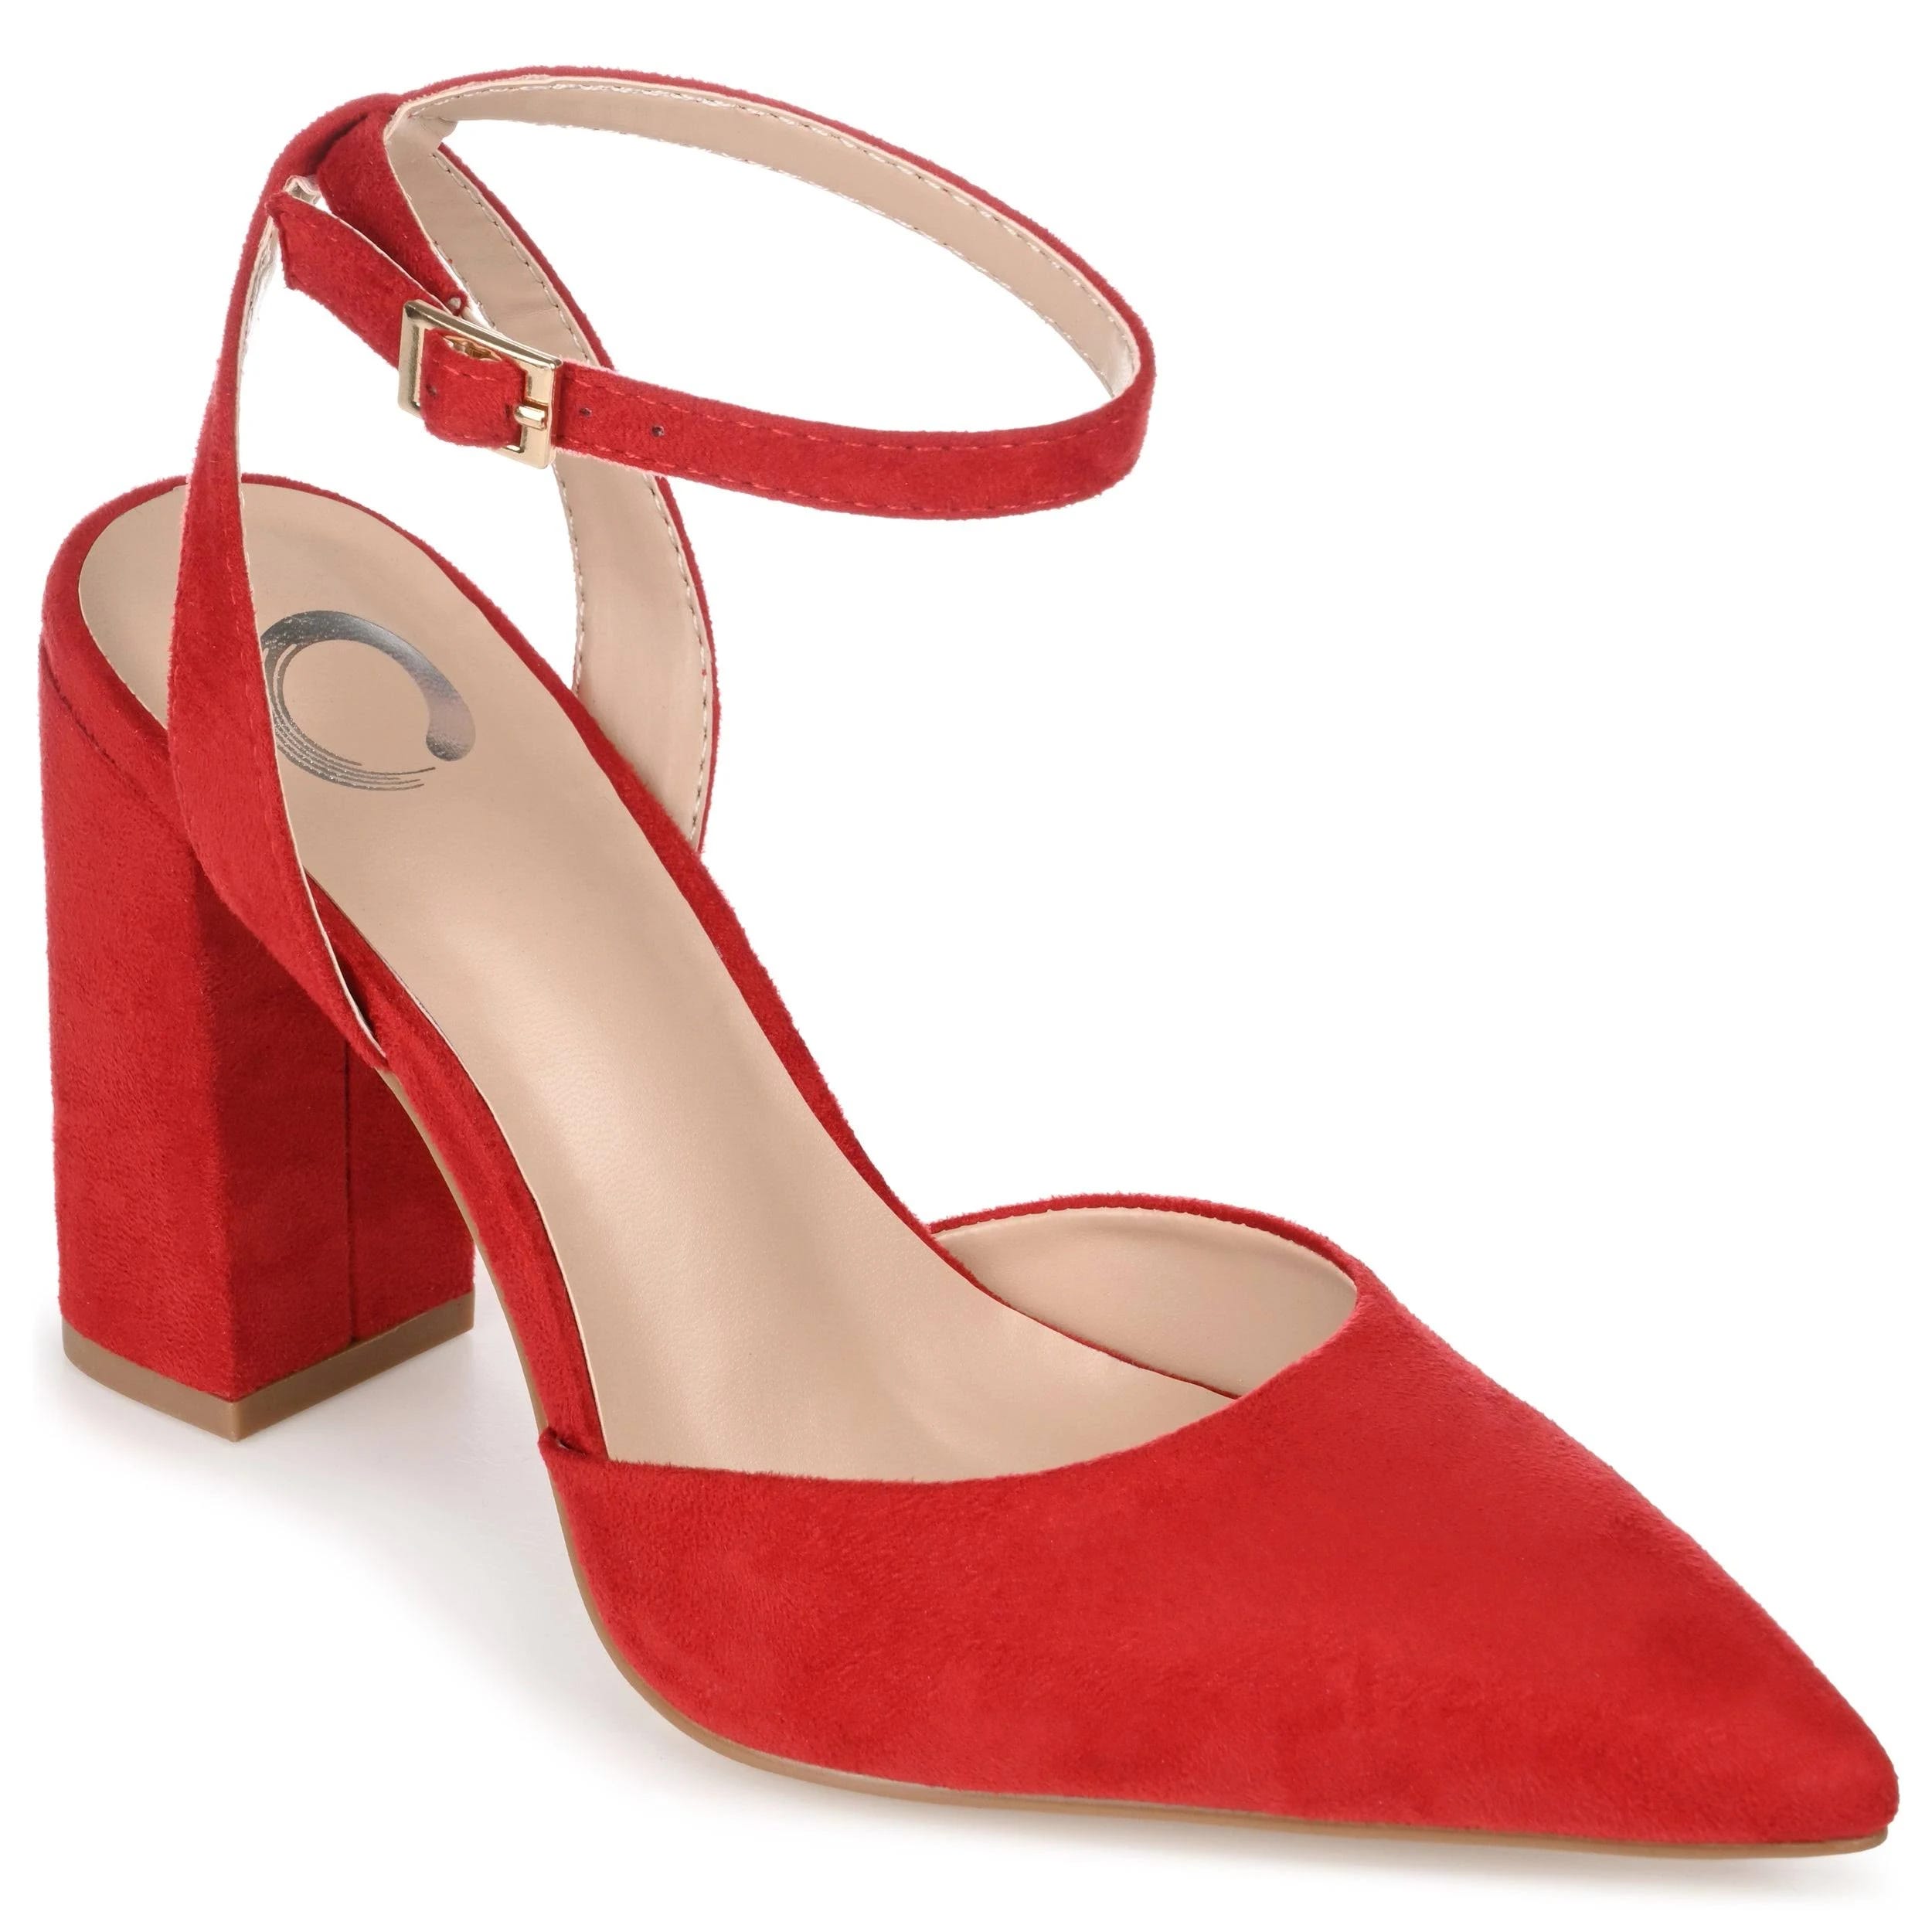 Comfortable Vegan Thick Red Heel Pump with Padded Insole | Image